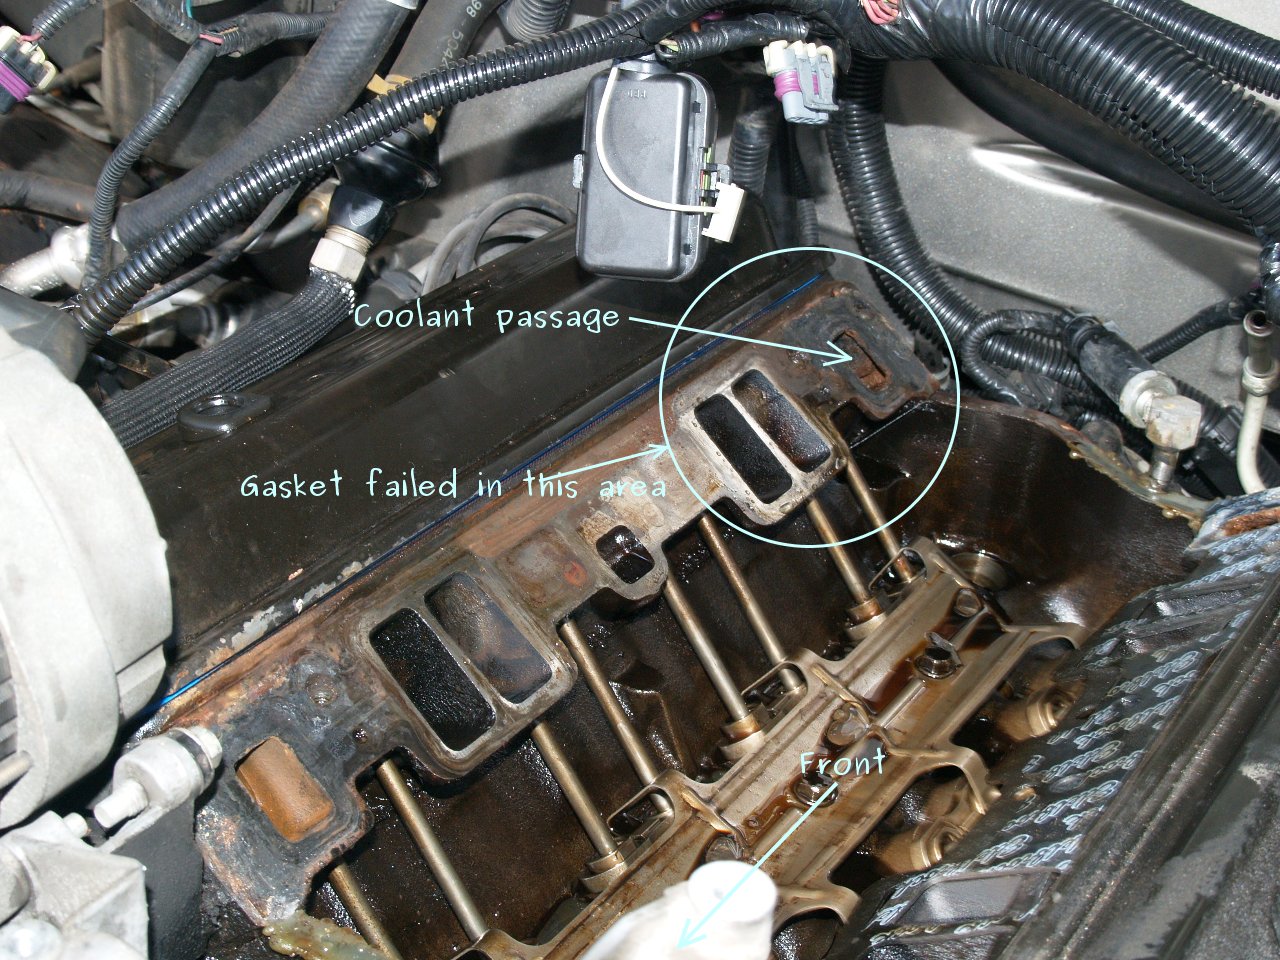 See B1984 in engine